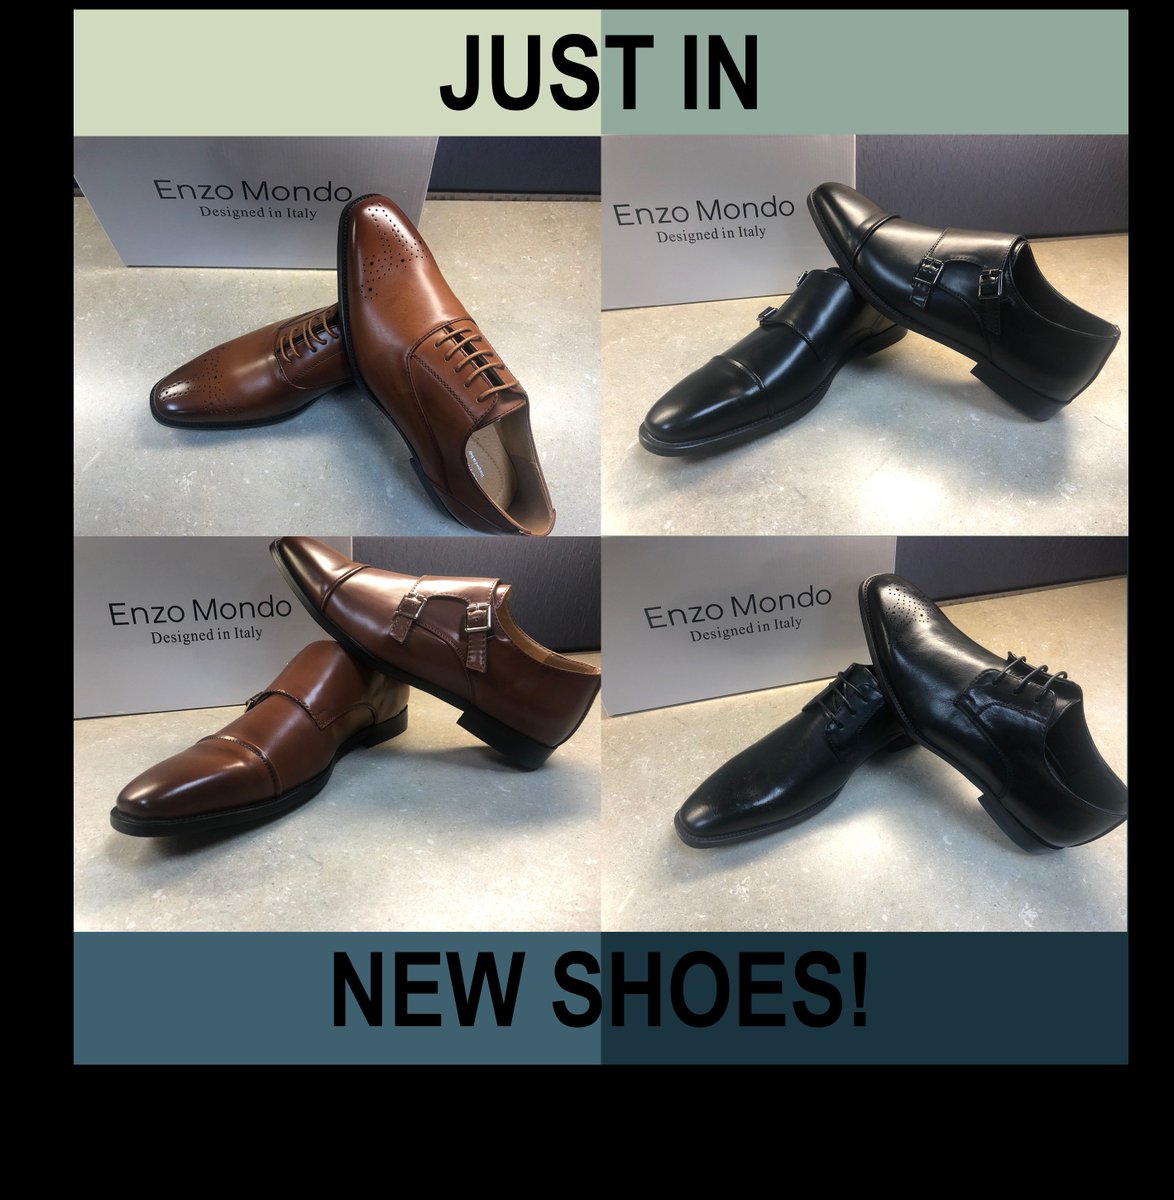 New Shoes In! soon to be at a store near you! #mensfashion #michiganweddings #ohioweddings #kentuckyweddings #detroitweddings #columbusweddings #michiganprom #ohioprom #kentuckyprom #ptux #presidenttuxedo